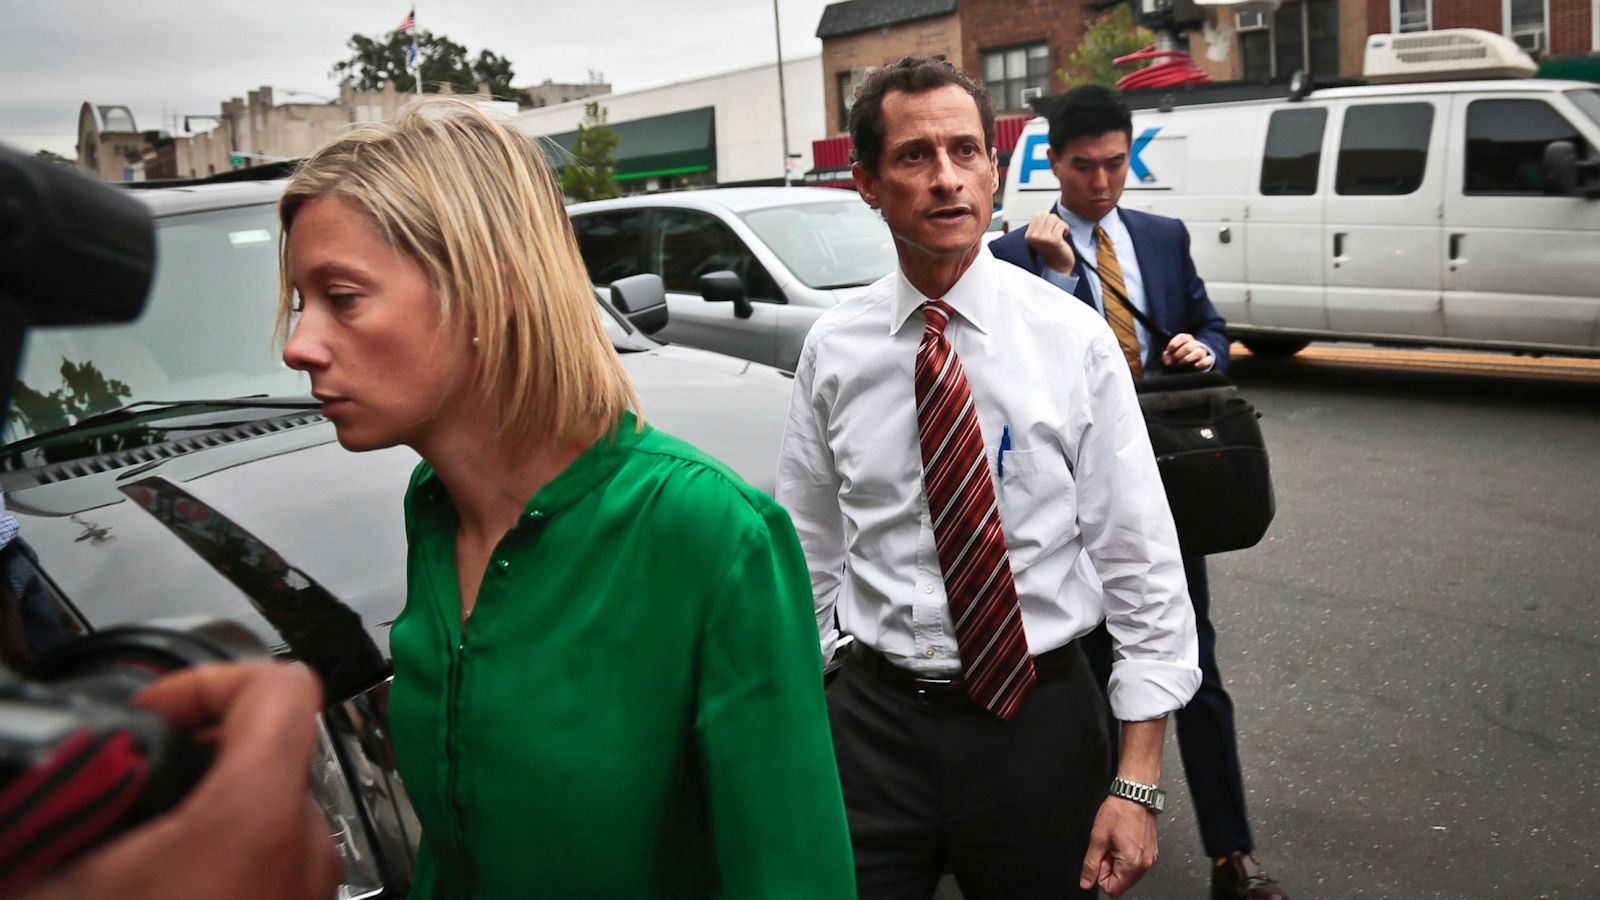 Anthony Weiner appears in good spirits after crushing primary defeat